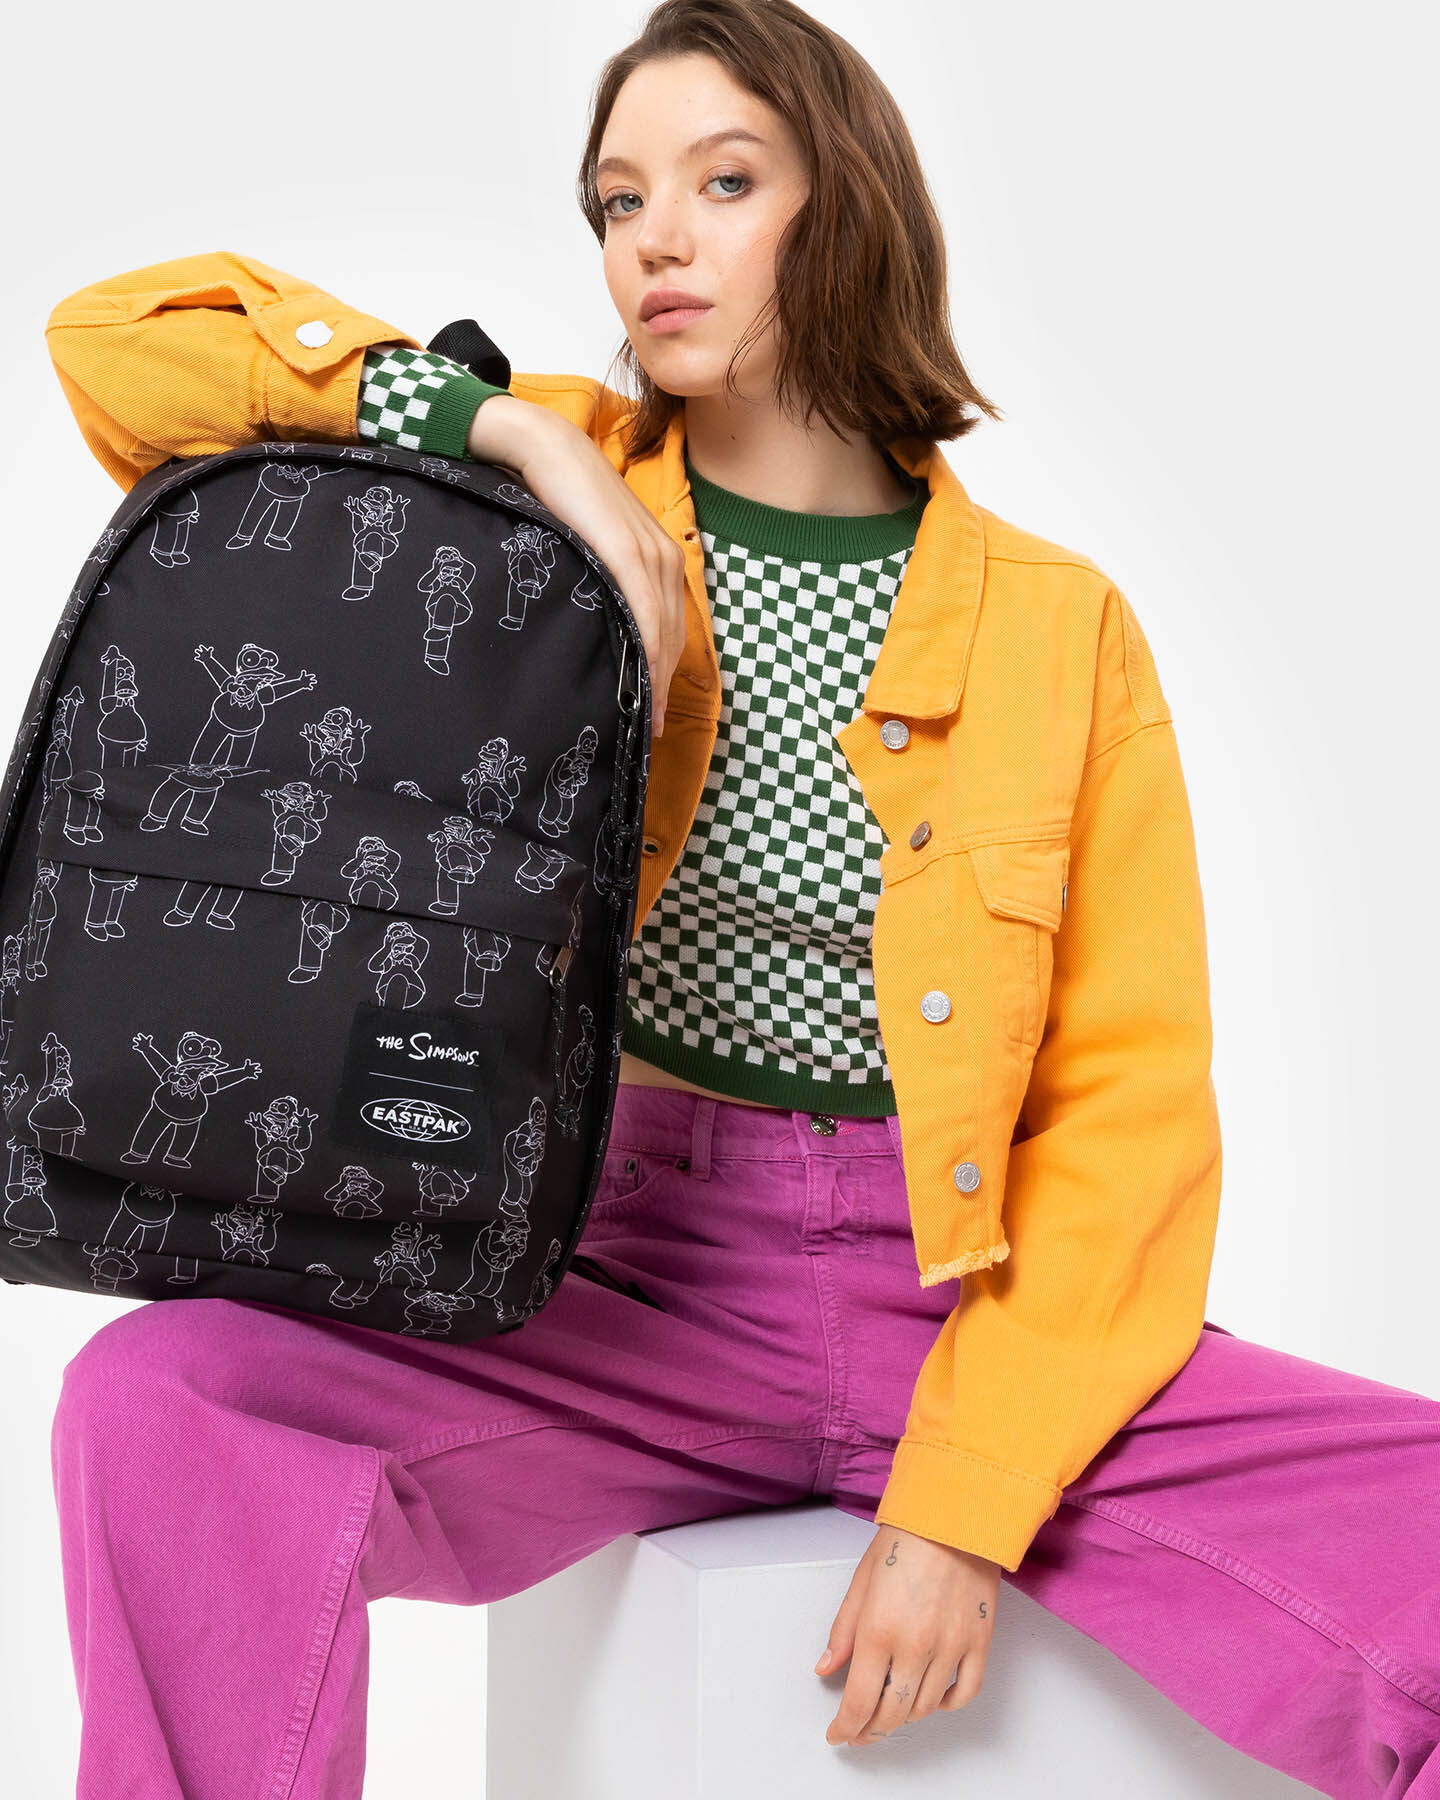  Zaino EASTPAK OUT OF OFFICE THE SIMPSONS  S5550619|7A1|OS scatto 1